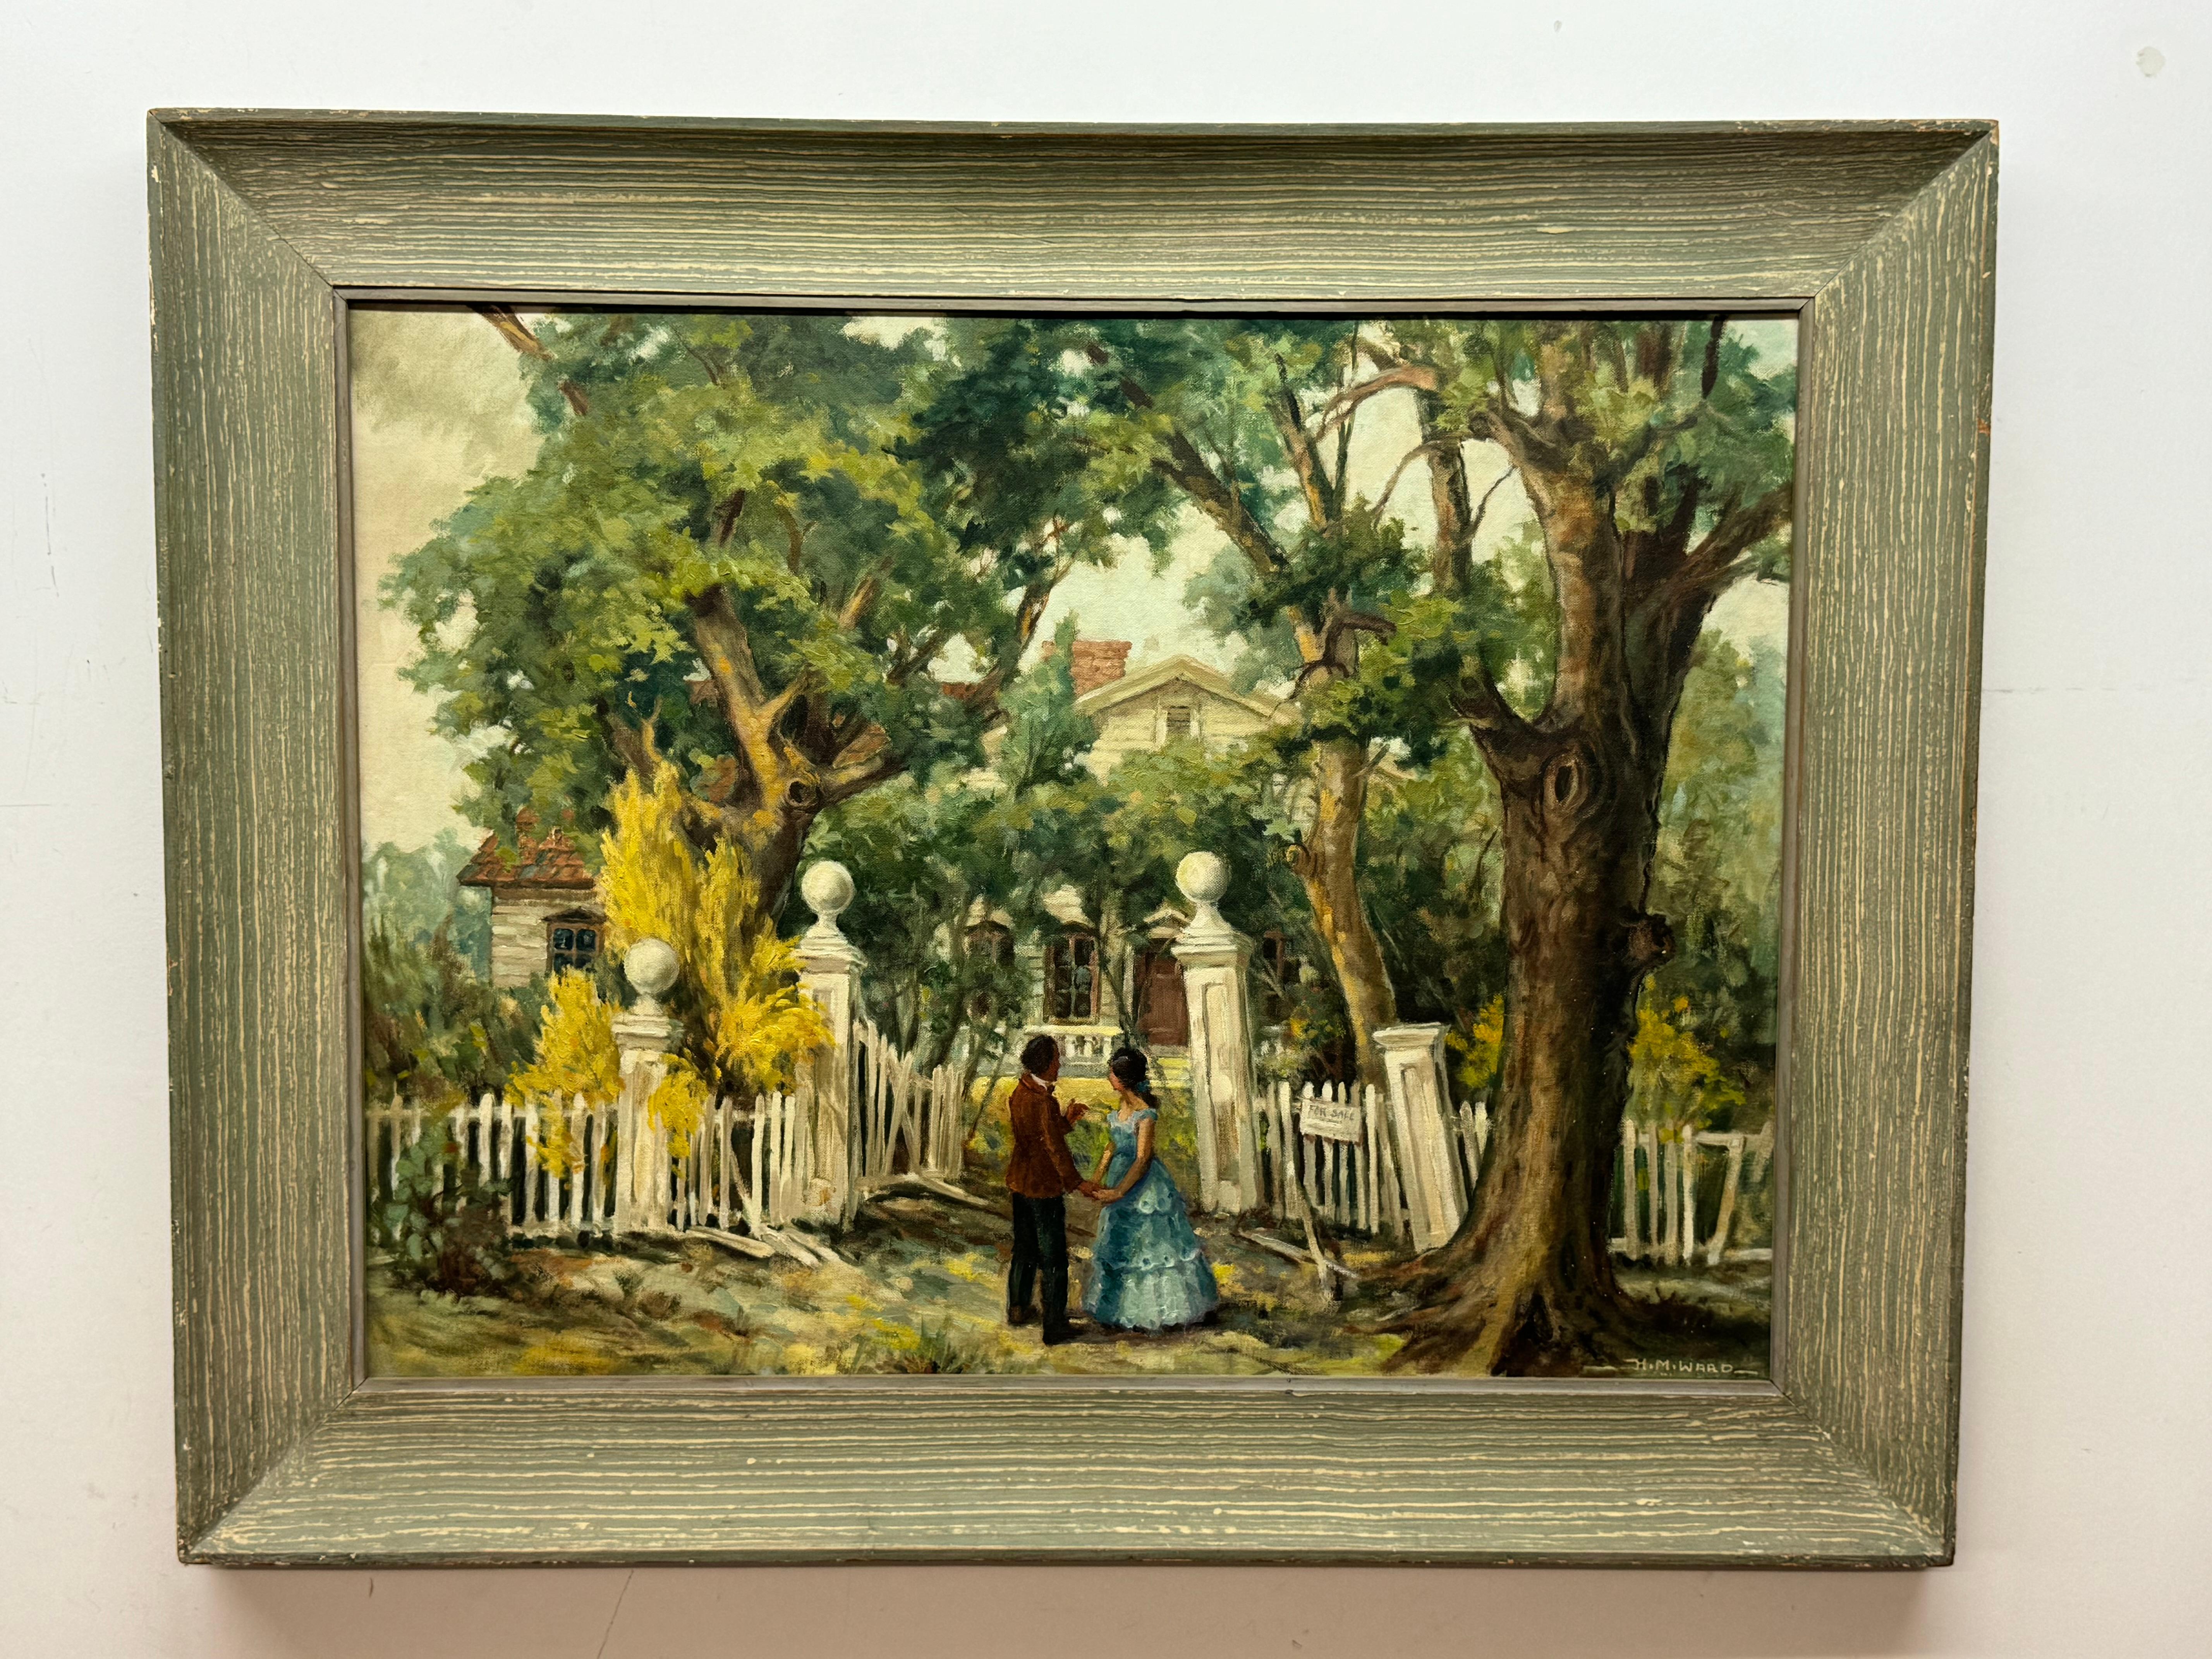 Harold Ward 1889 - 1973 "Bygone Days"

Oil on canvas mounted to wood panel 

22 x 29 unframed, 28.5 x 33.25 framed  
